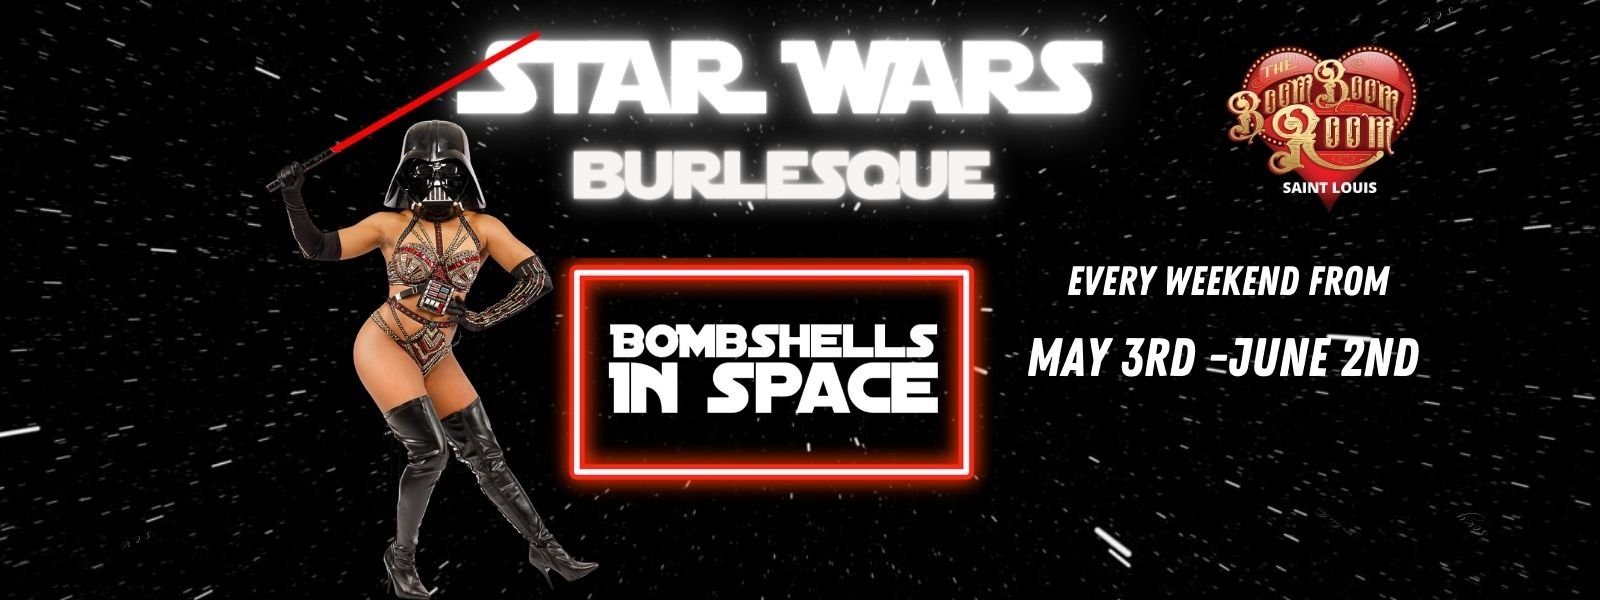 bombshells in space fb event cover (1600 x 600 px).jpg